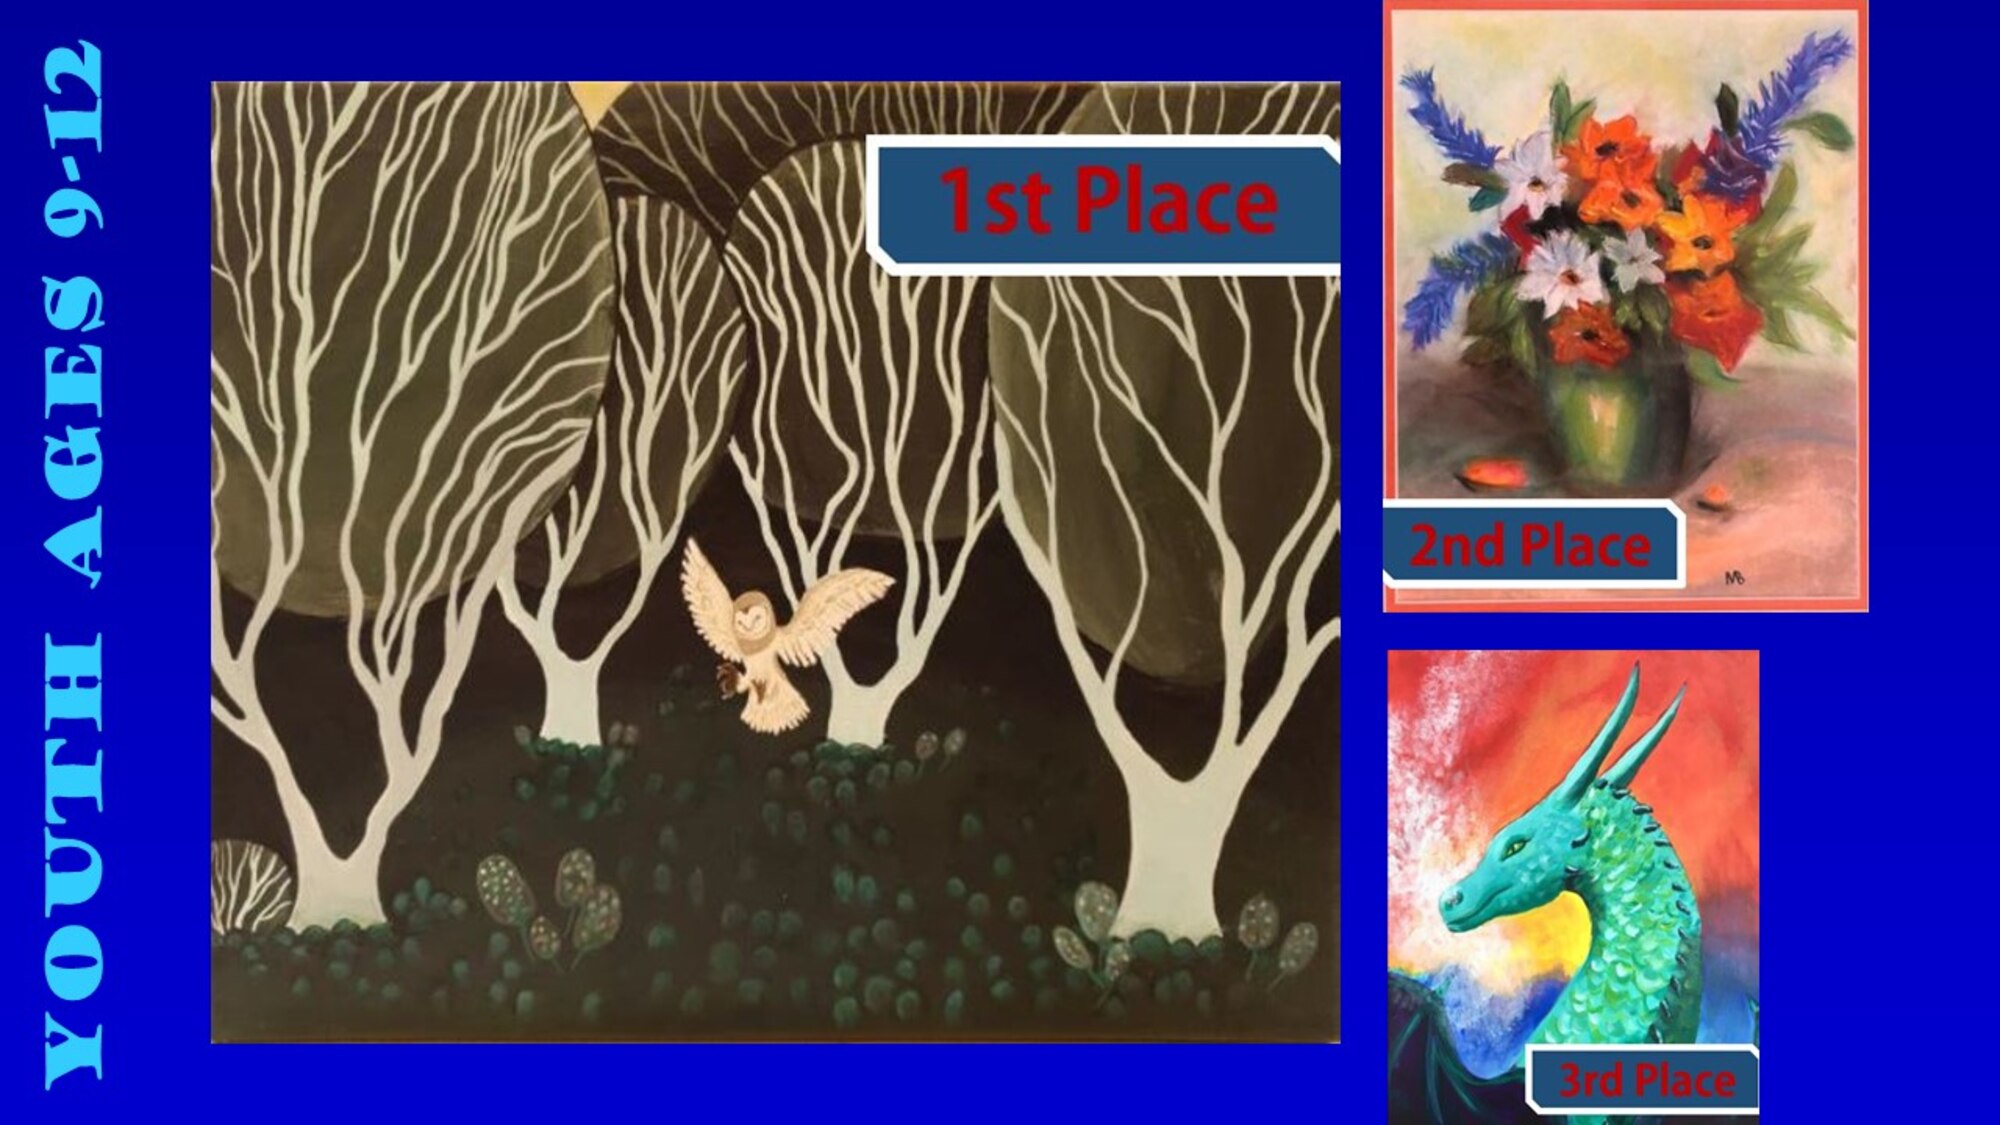 Congratulations to the 2019 Air Force Art Contest winners, ages 9-12. (U.S. Air Force graphic using winning art work)